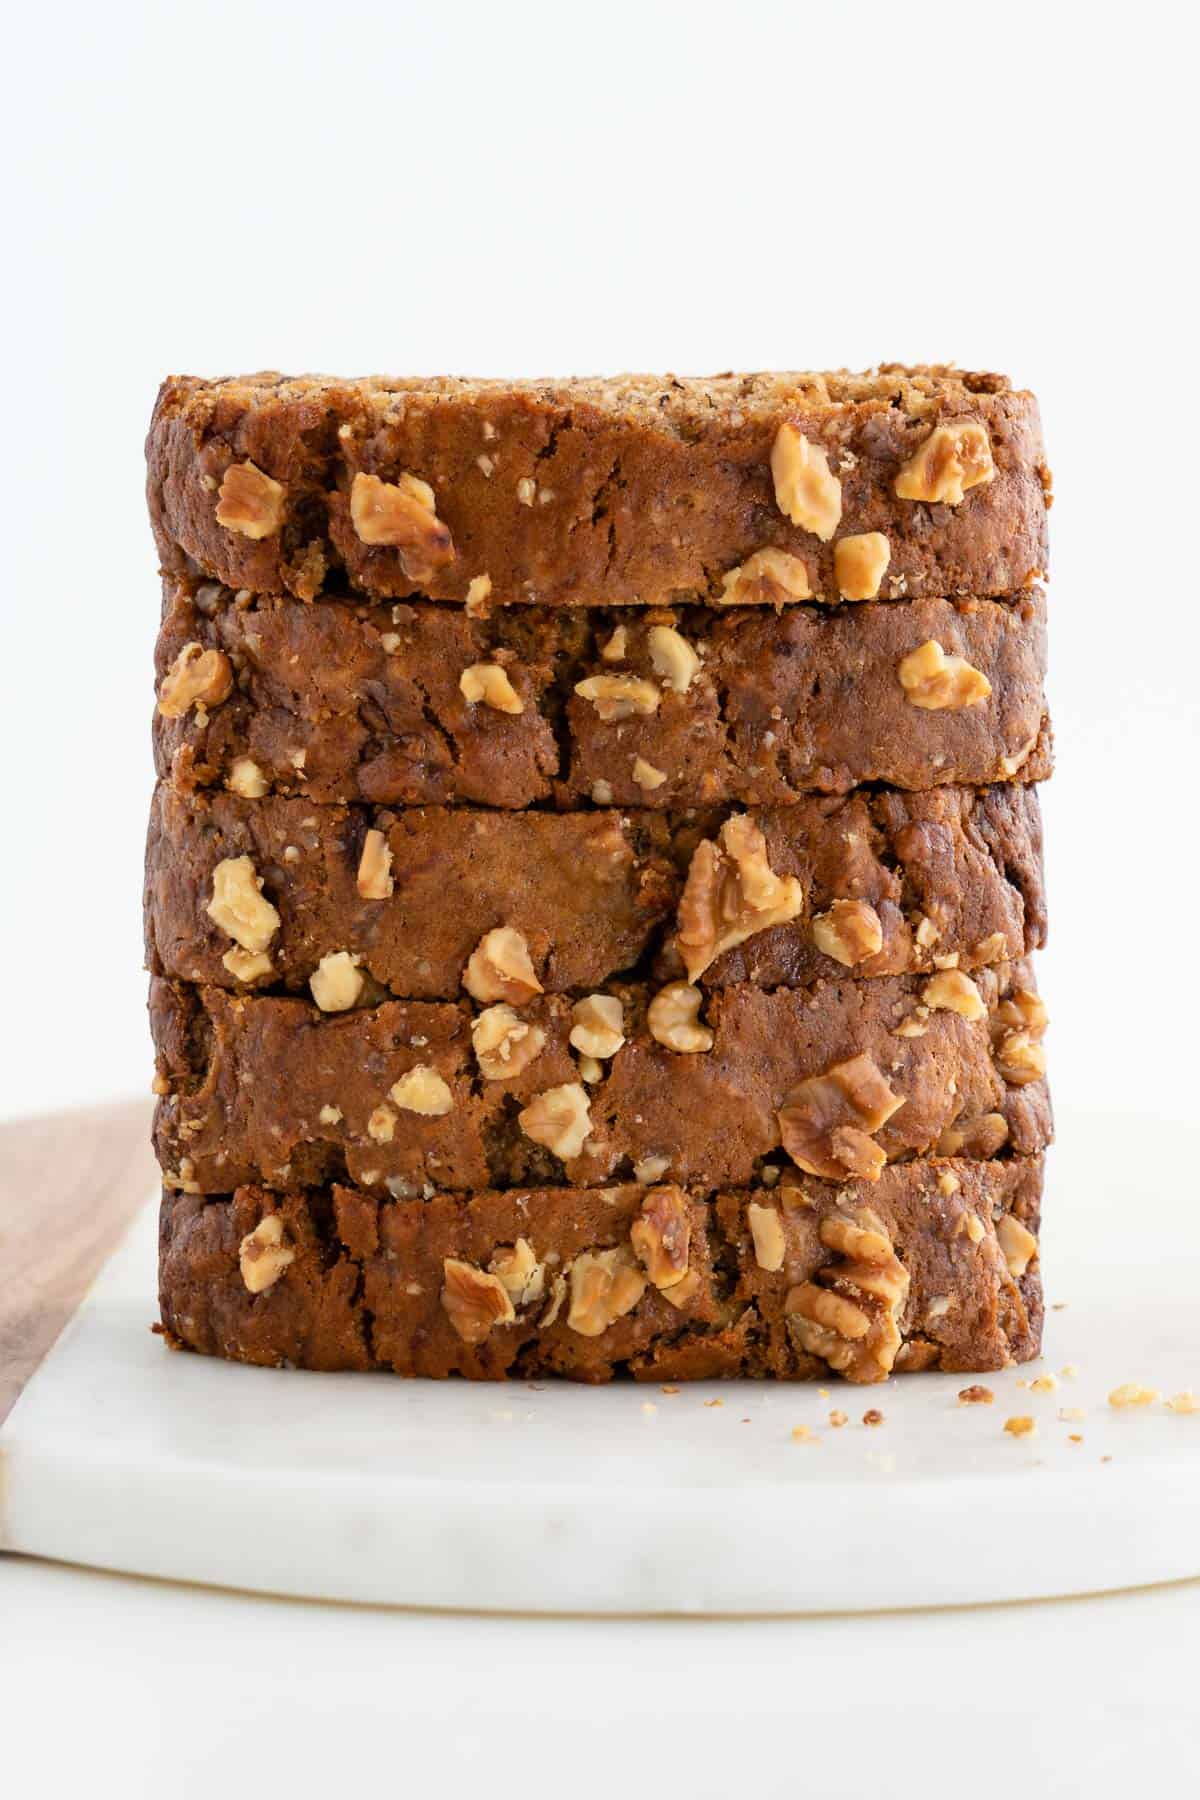 a stack of vegan banana bread slices with walnuts